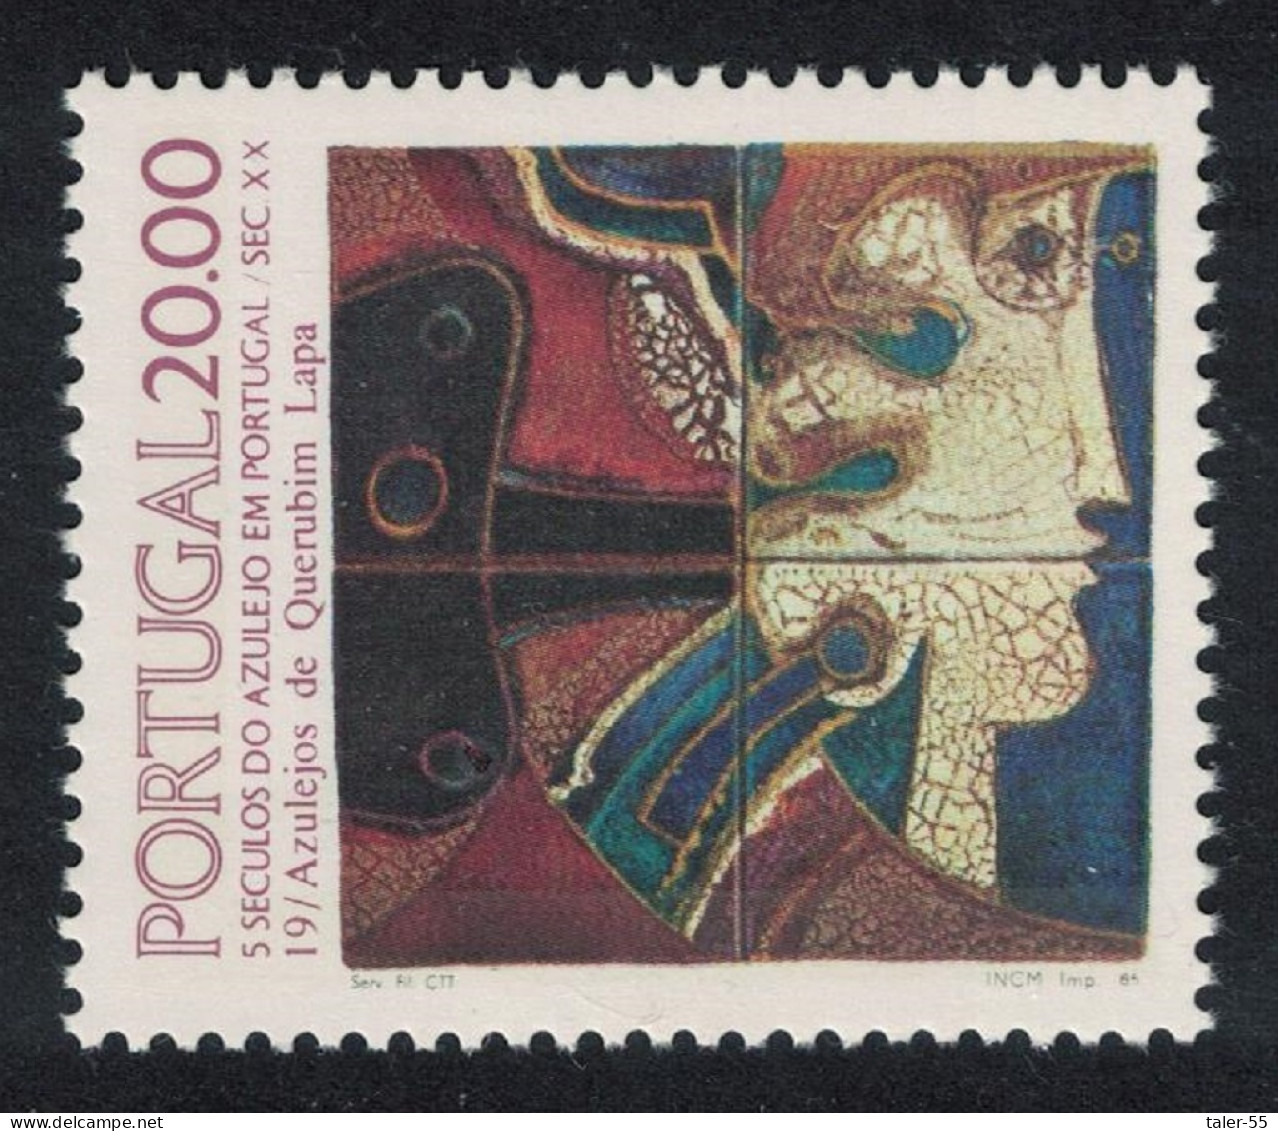 Portugal Tiles 19th Series 1985 MNH SG#2020 - Unused Stamps